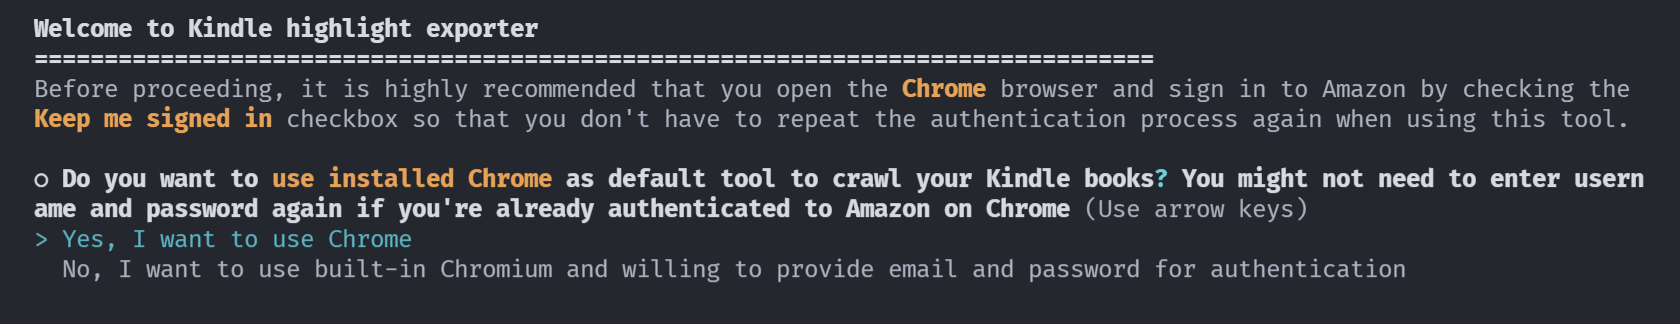 Greeting and use Chrome question